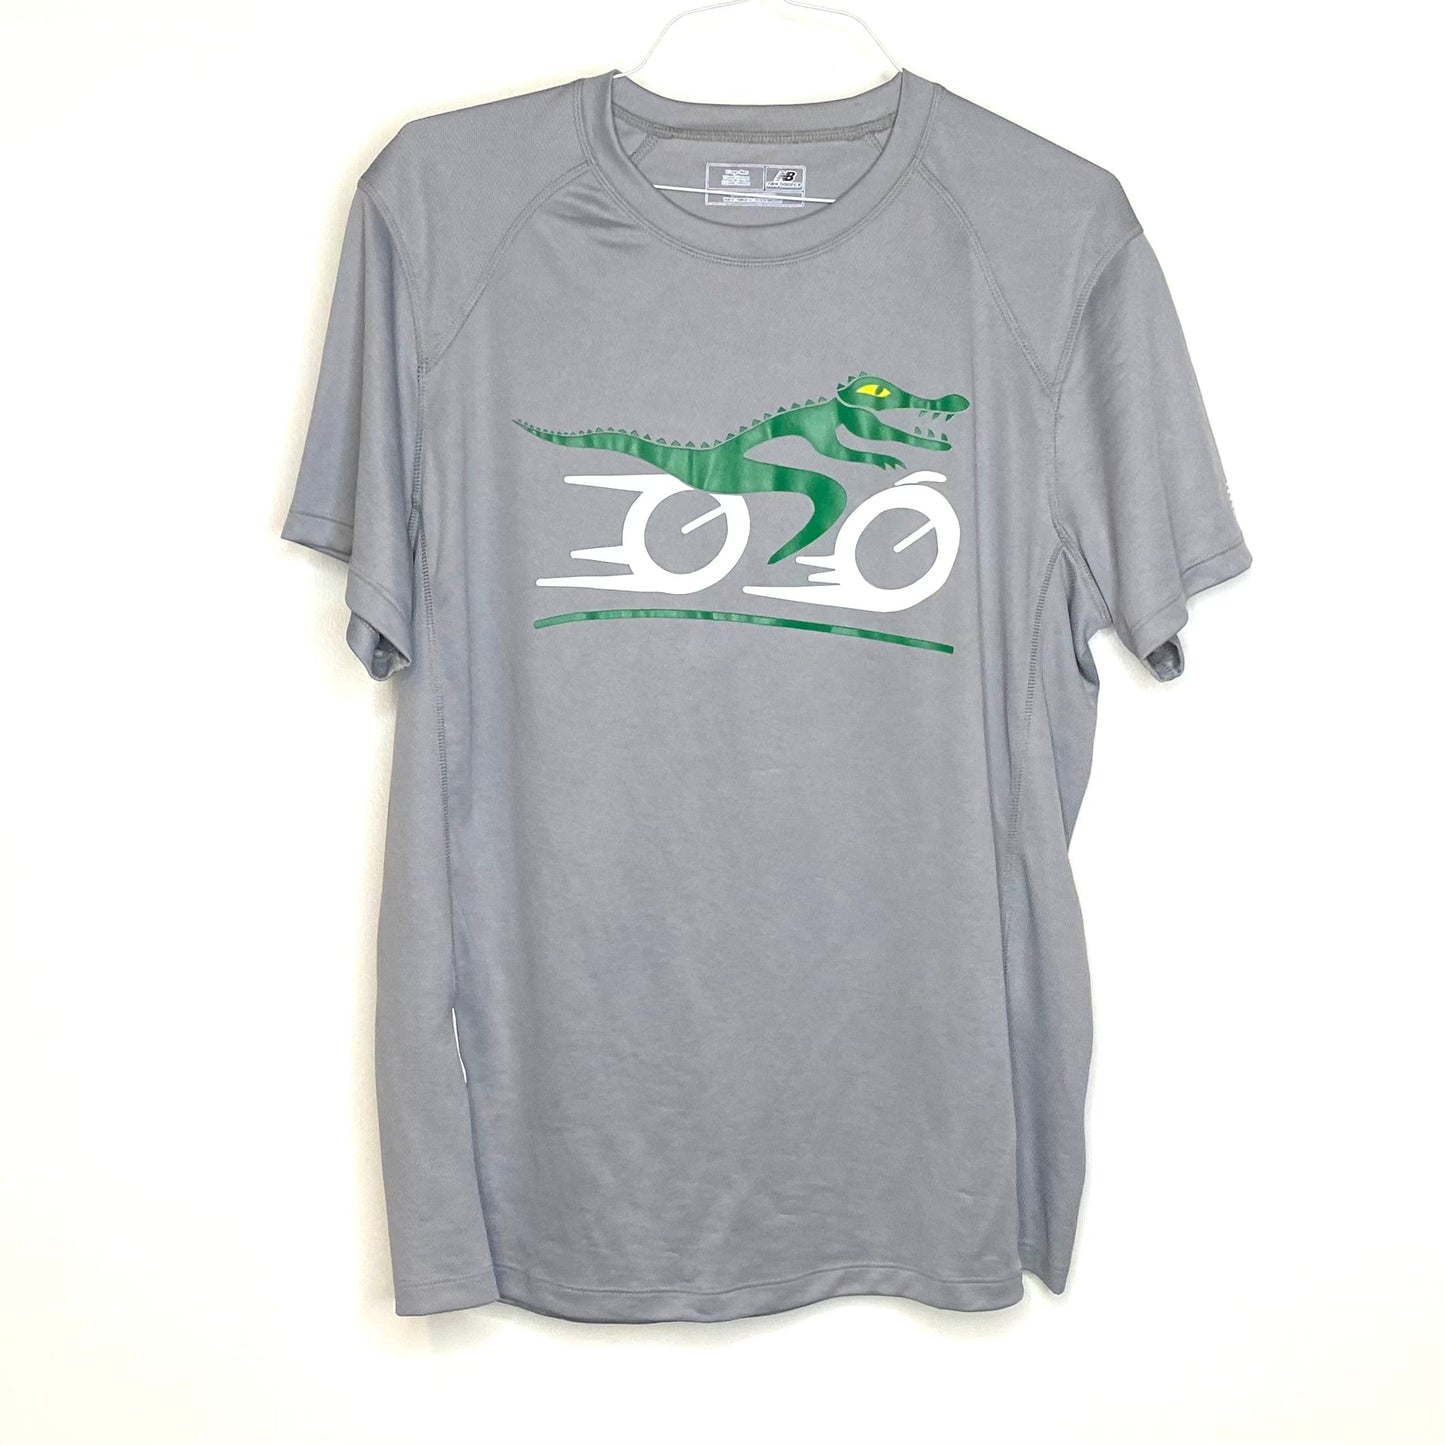 NEW BALANCE Mens Size XL Gray ALLIGATOR'S CYCLING BICYCLE SHOP T-Shirt S/s